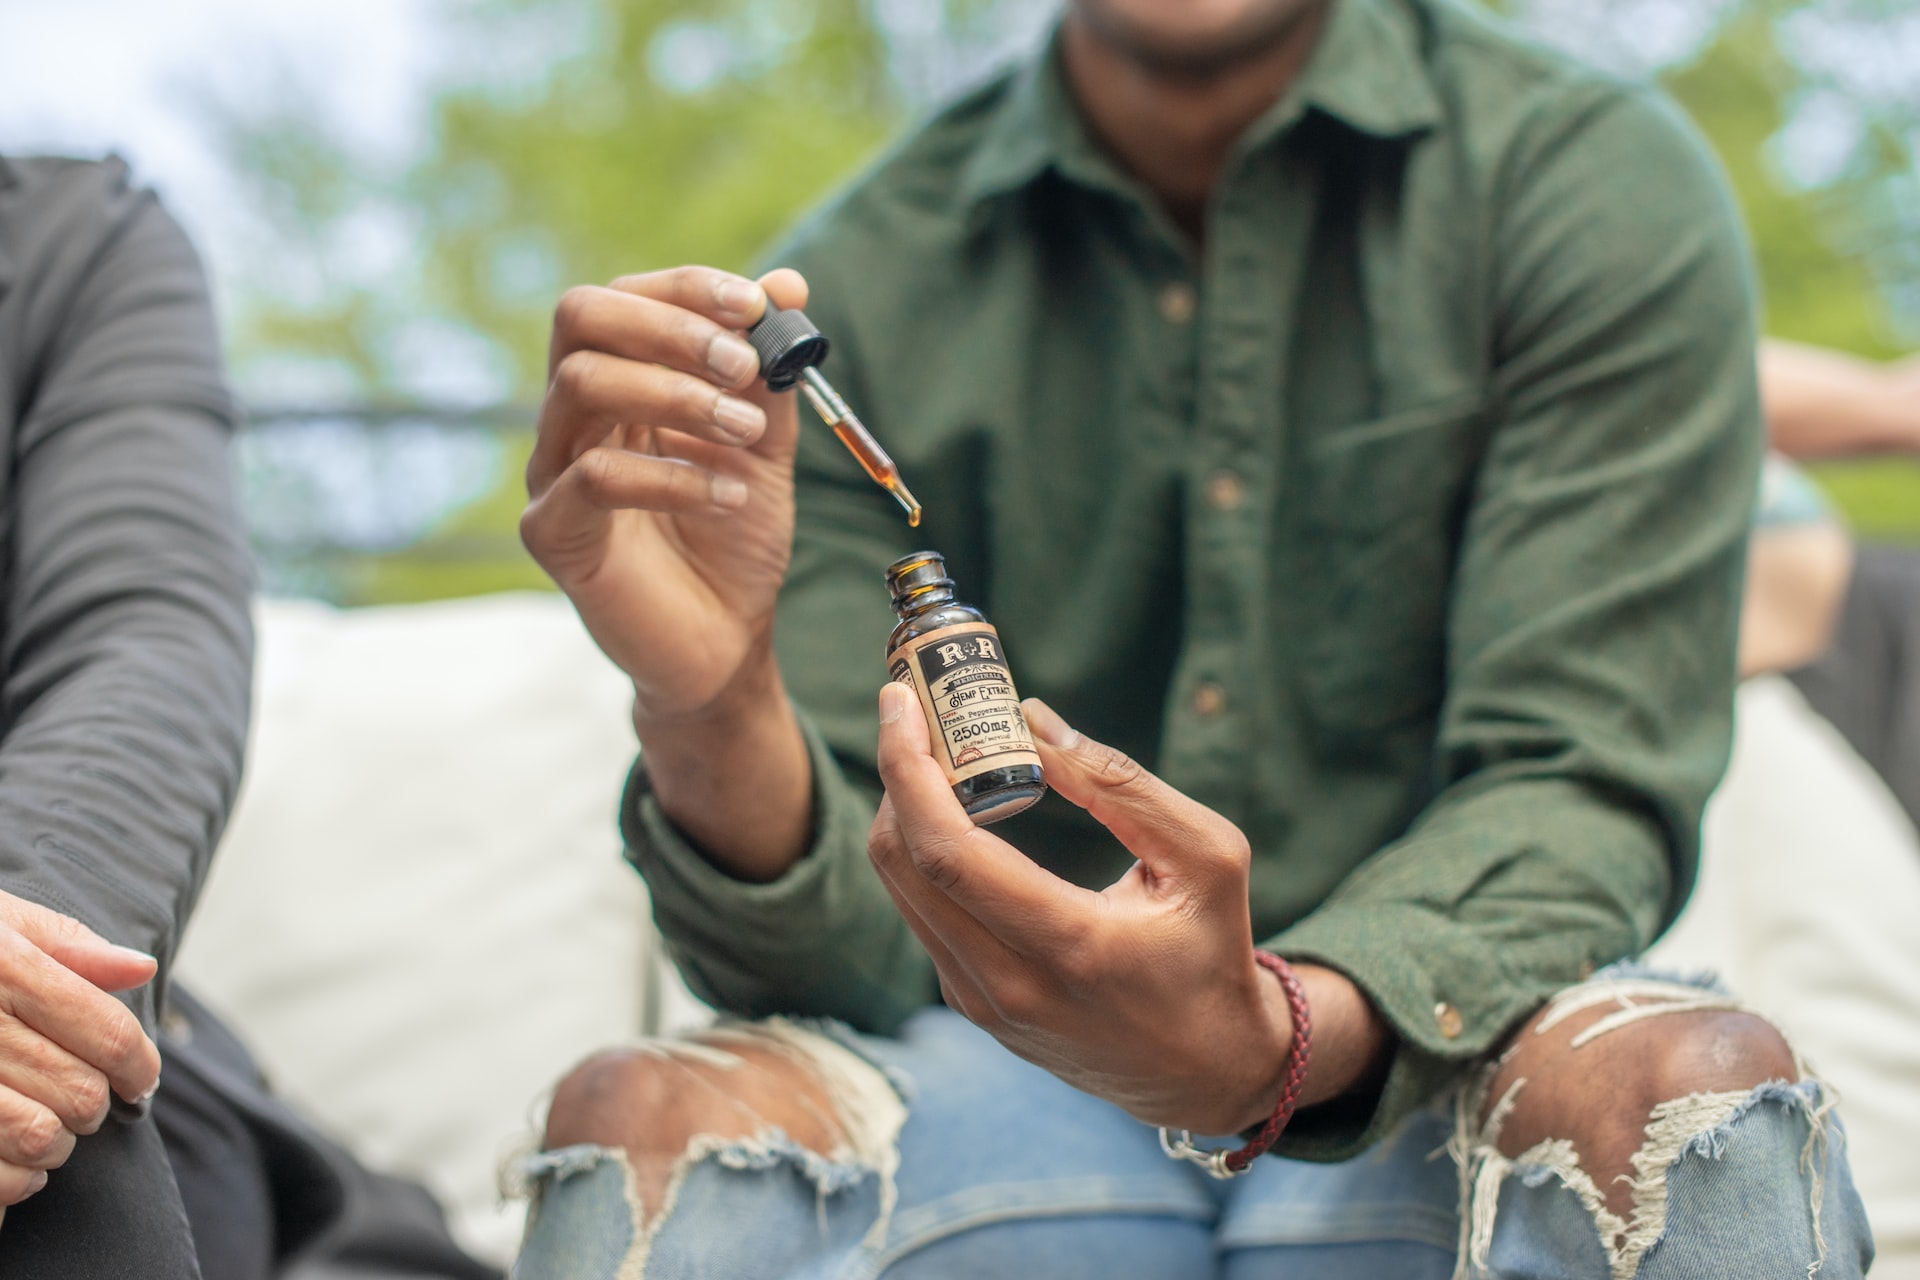 Can You Overdose On CBD?